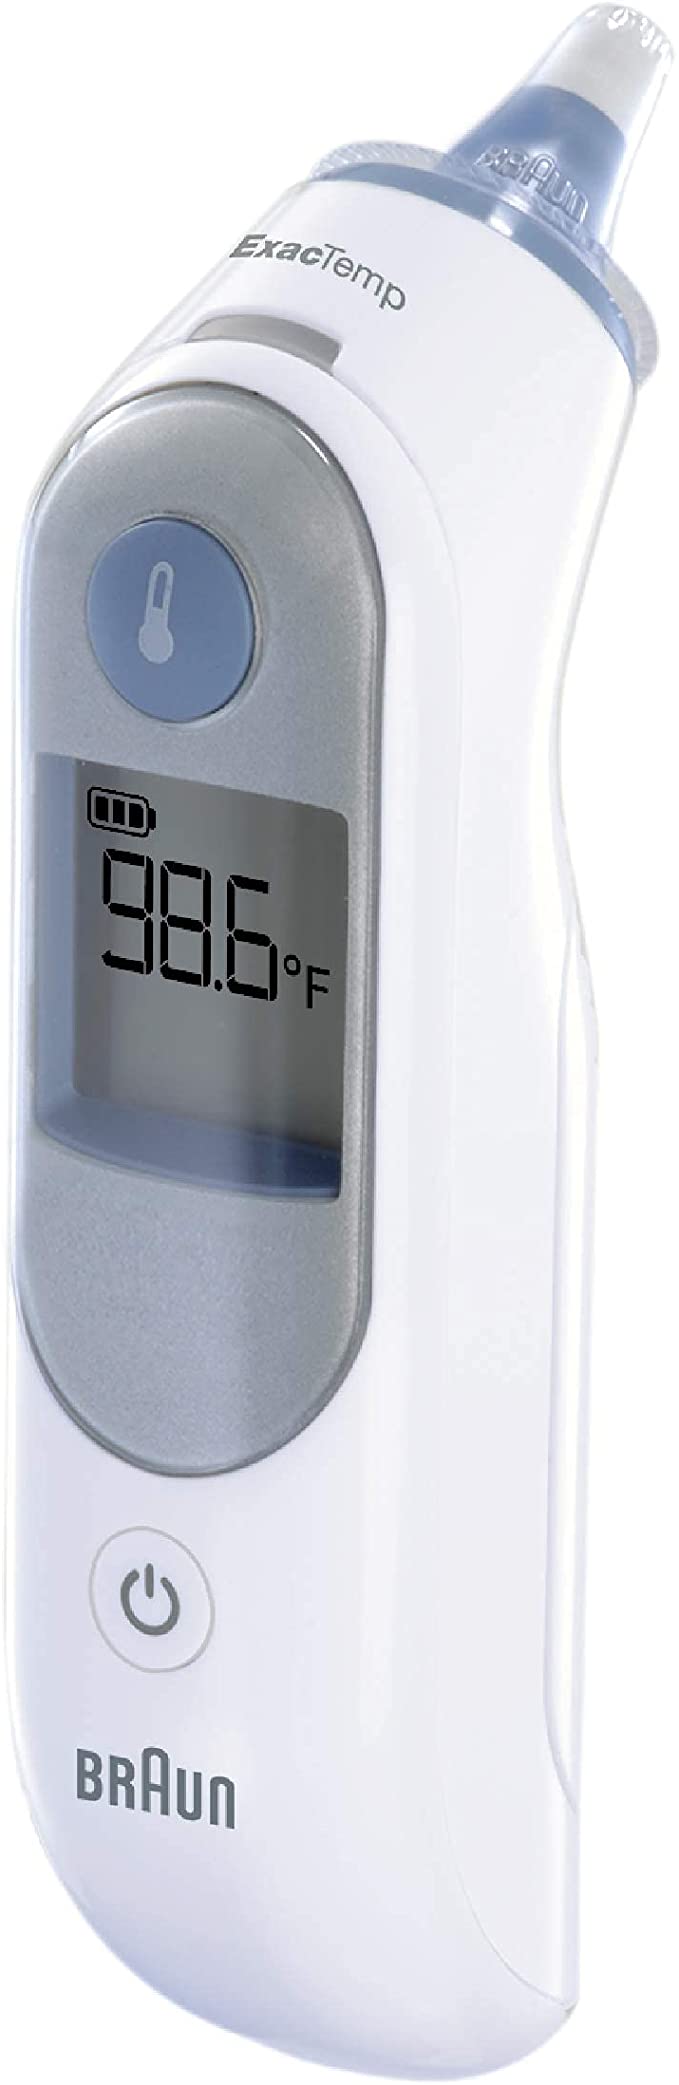 Thermometer for Precise Fever Tracking at Home